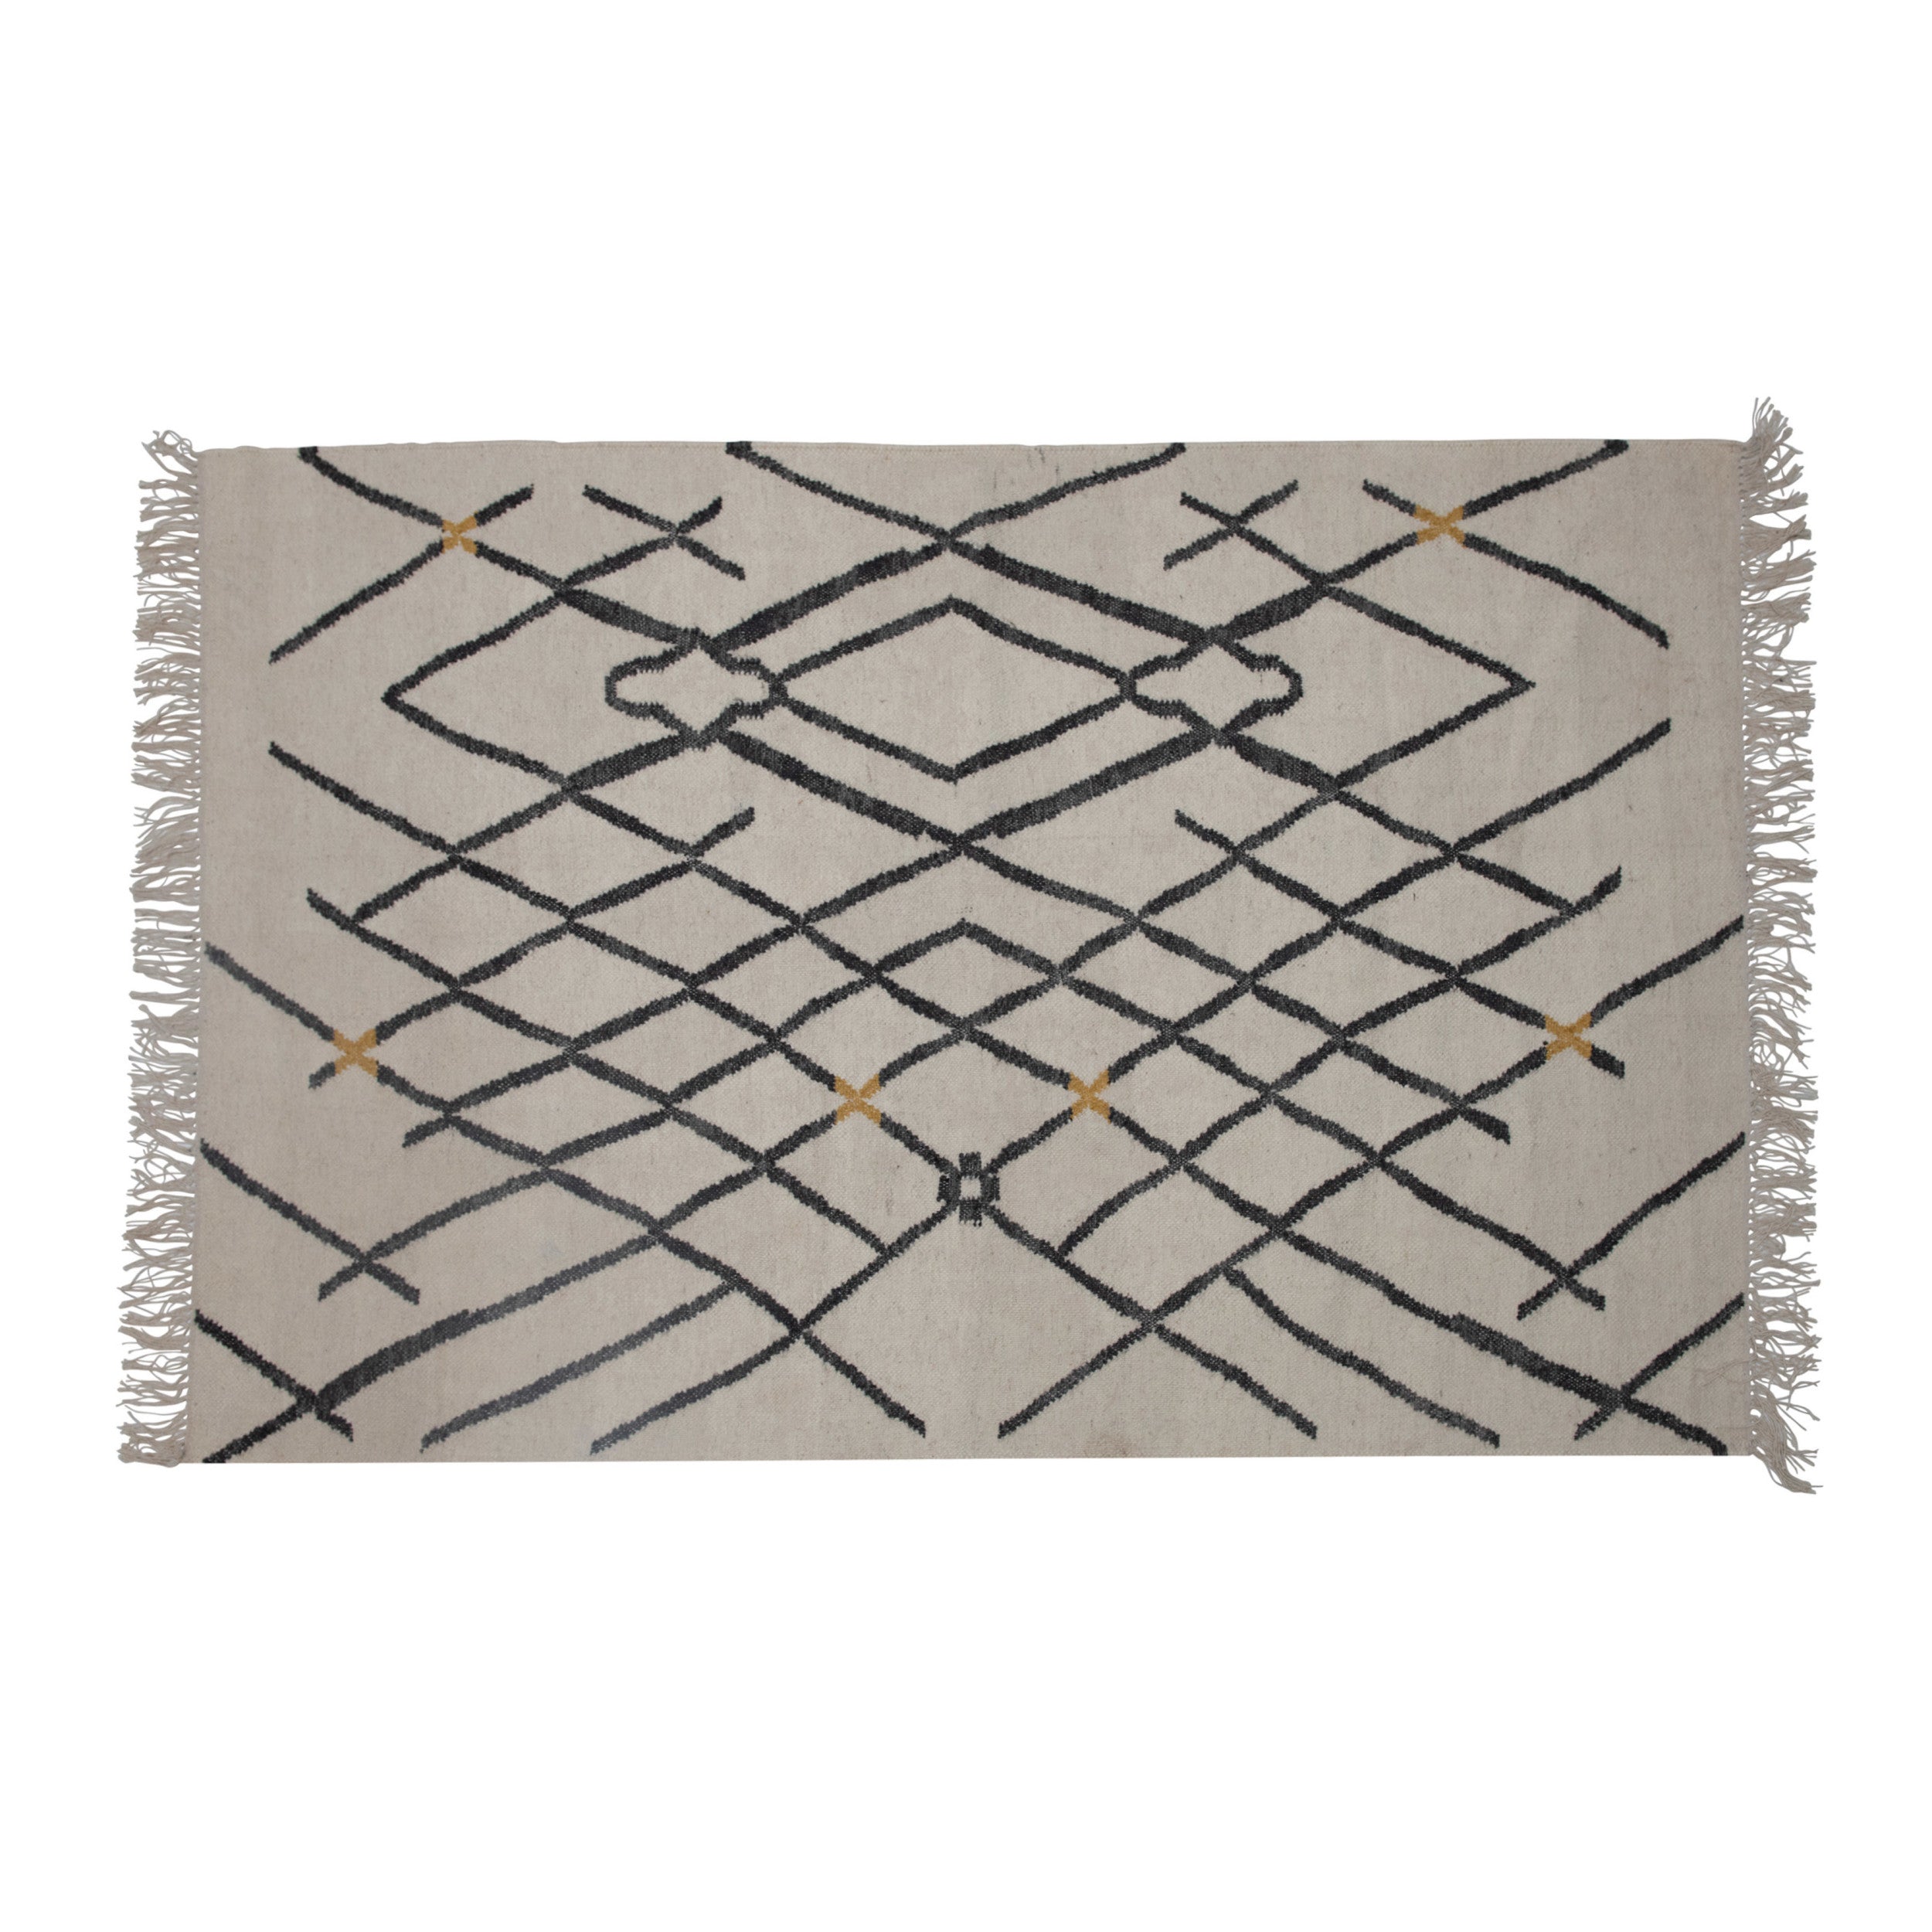 Wool and cotton blend Moroccan inspired rug.